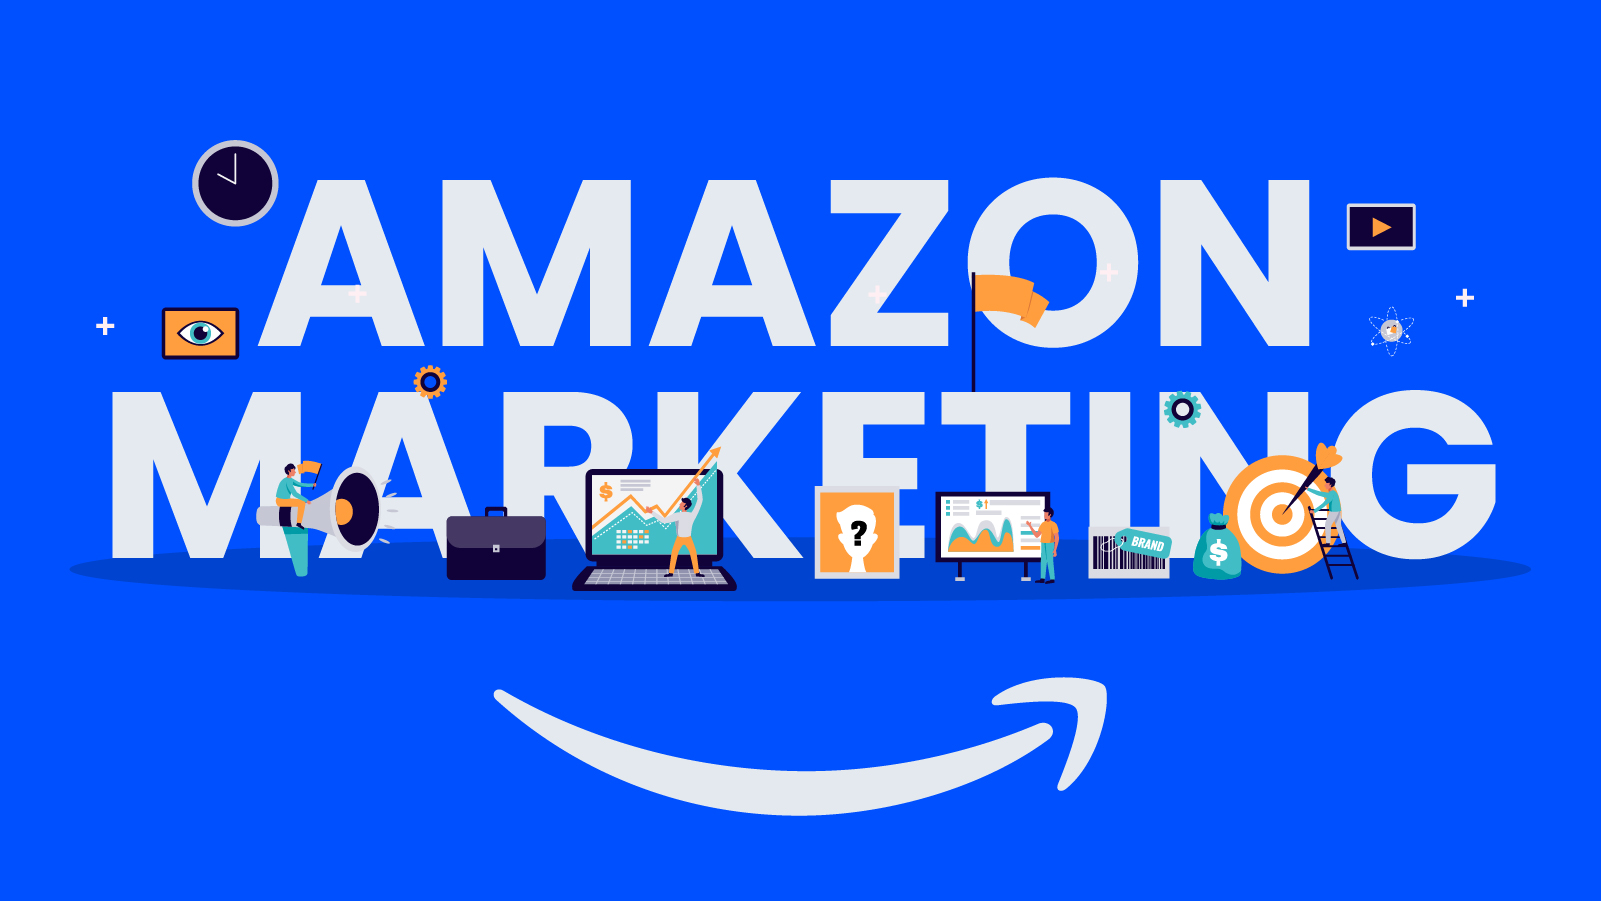 Here Is An Image That Combines The Amazon Logo And A Marketing Strategy Symbol Such As A Graph Or A